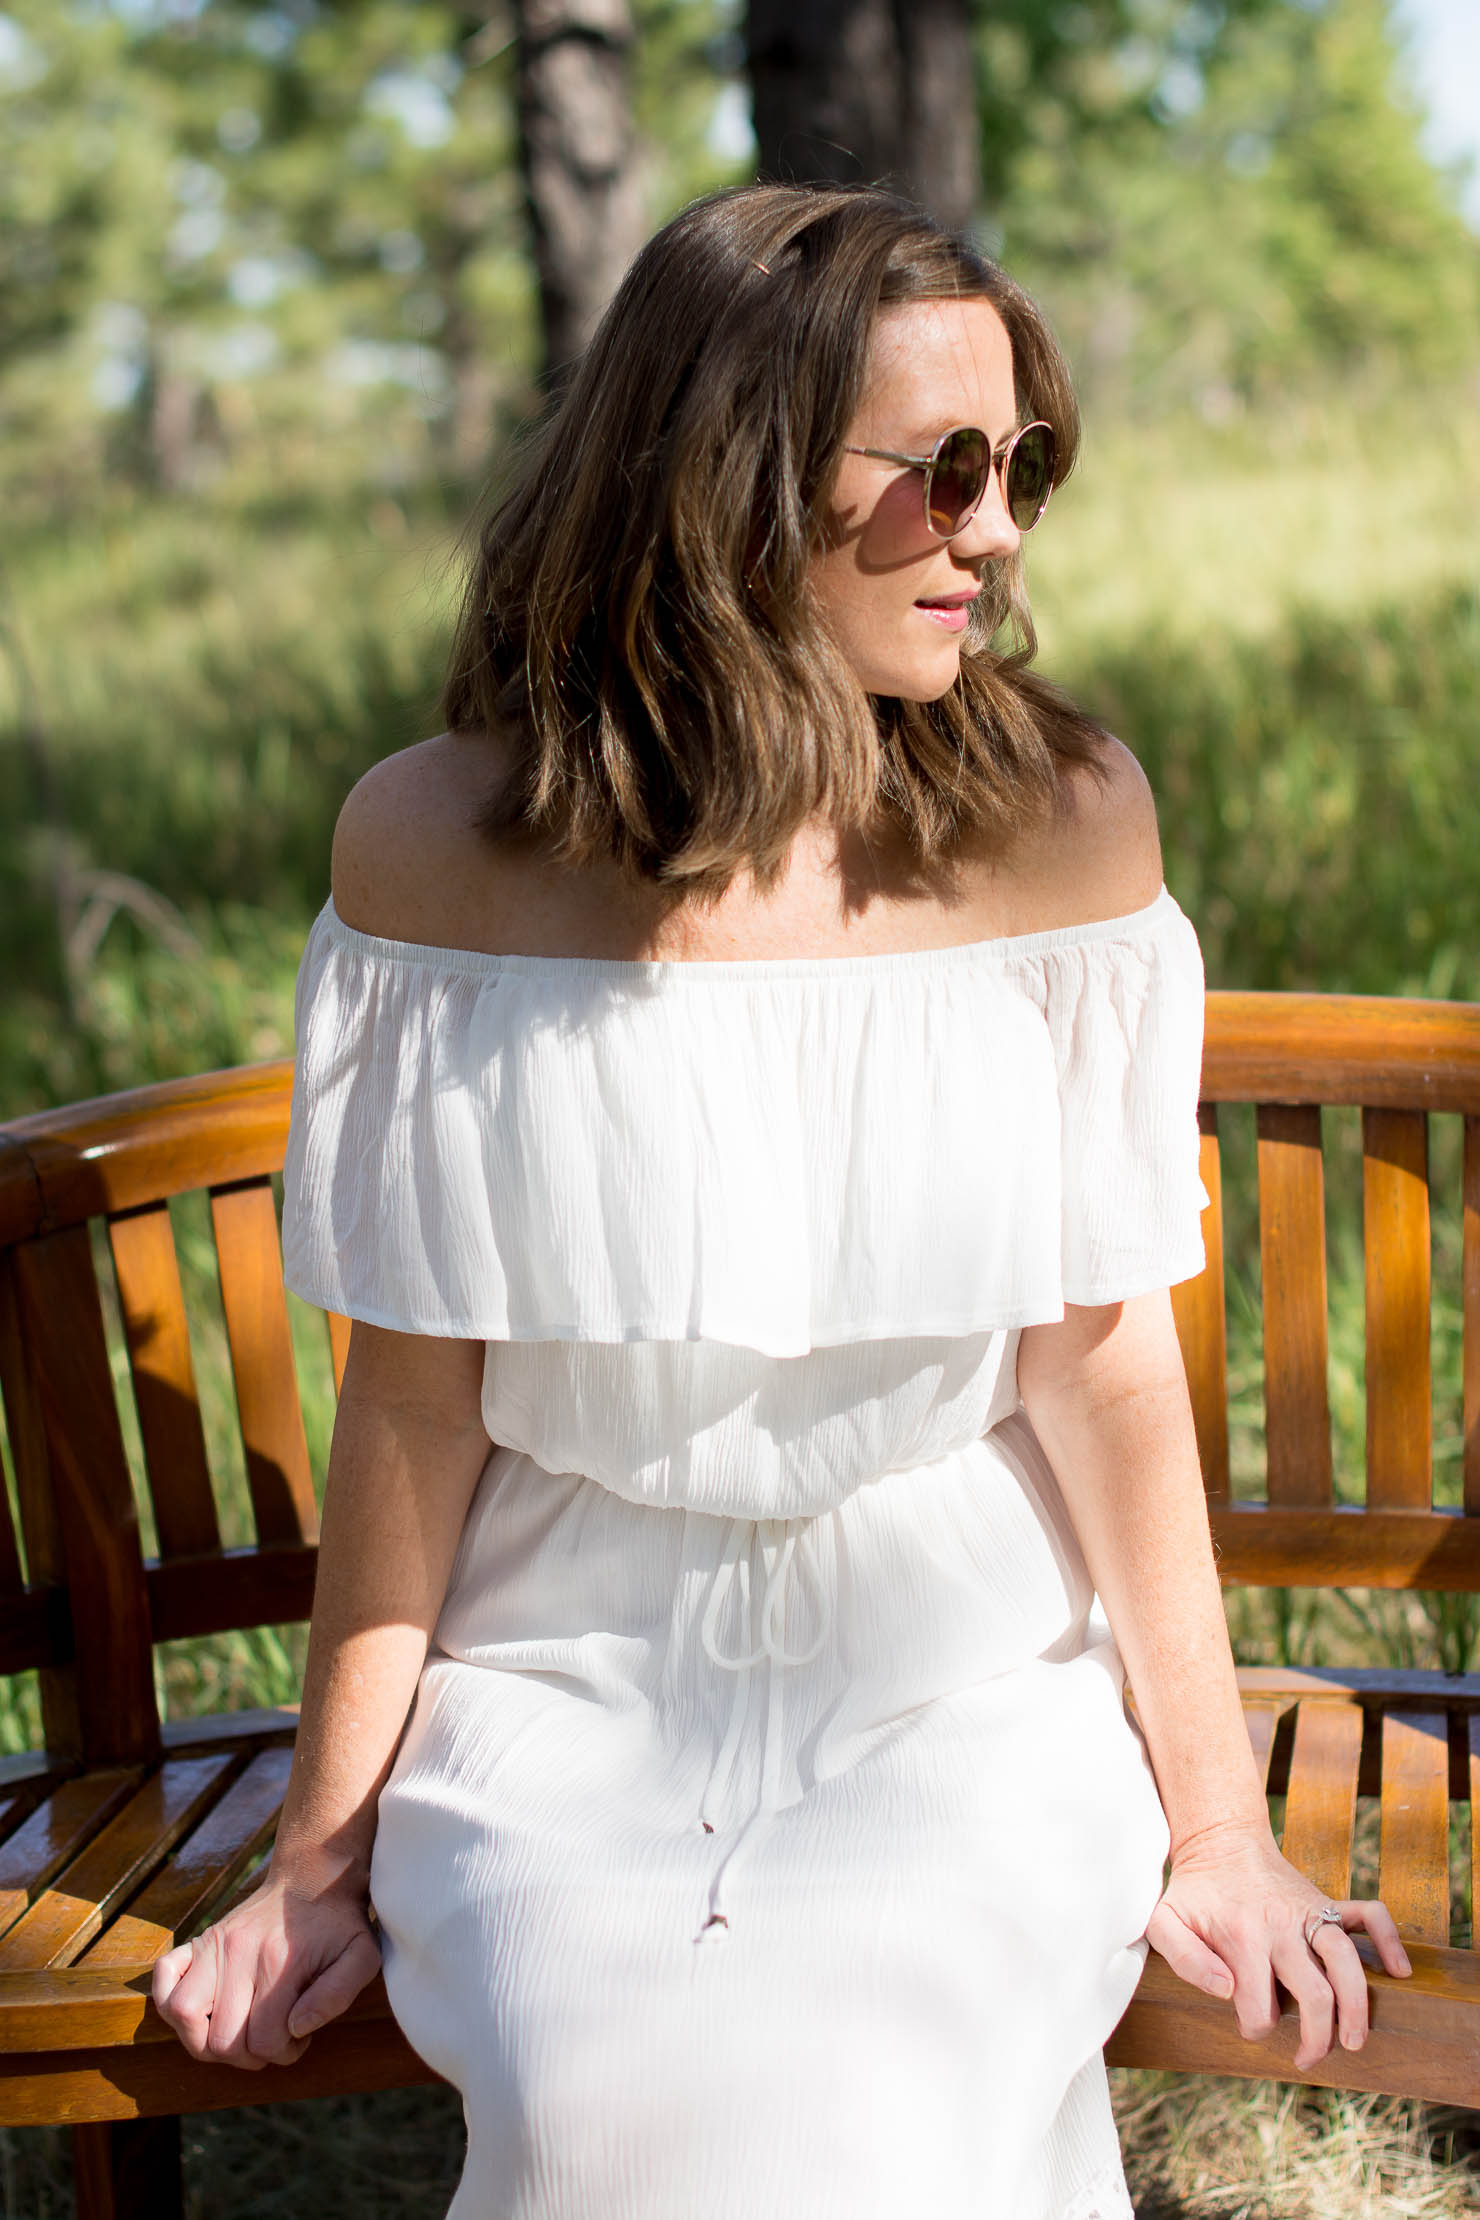 endless summer, 10 things you didn't know about me, off she shoulder white maxi dress, black hills